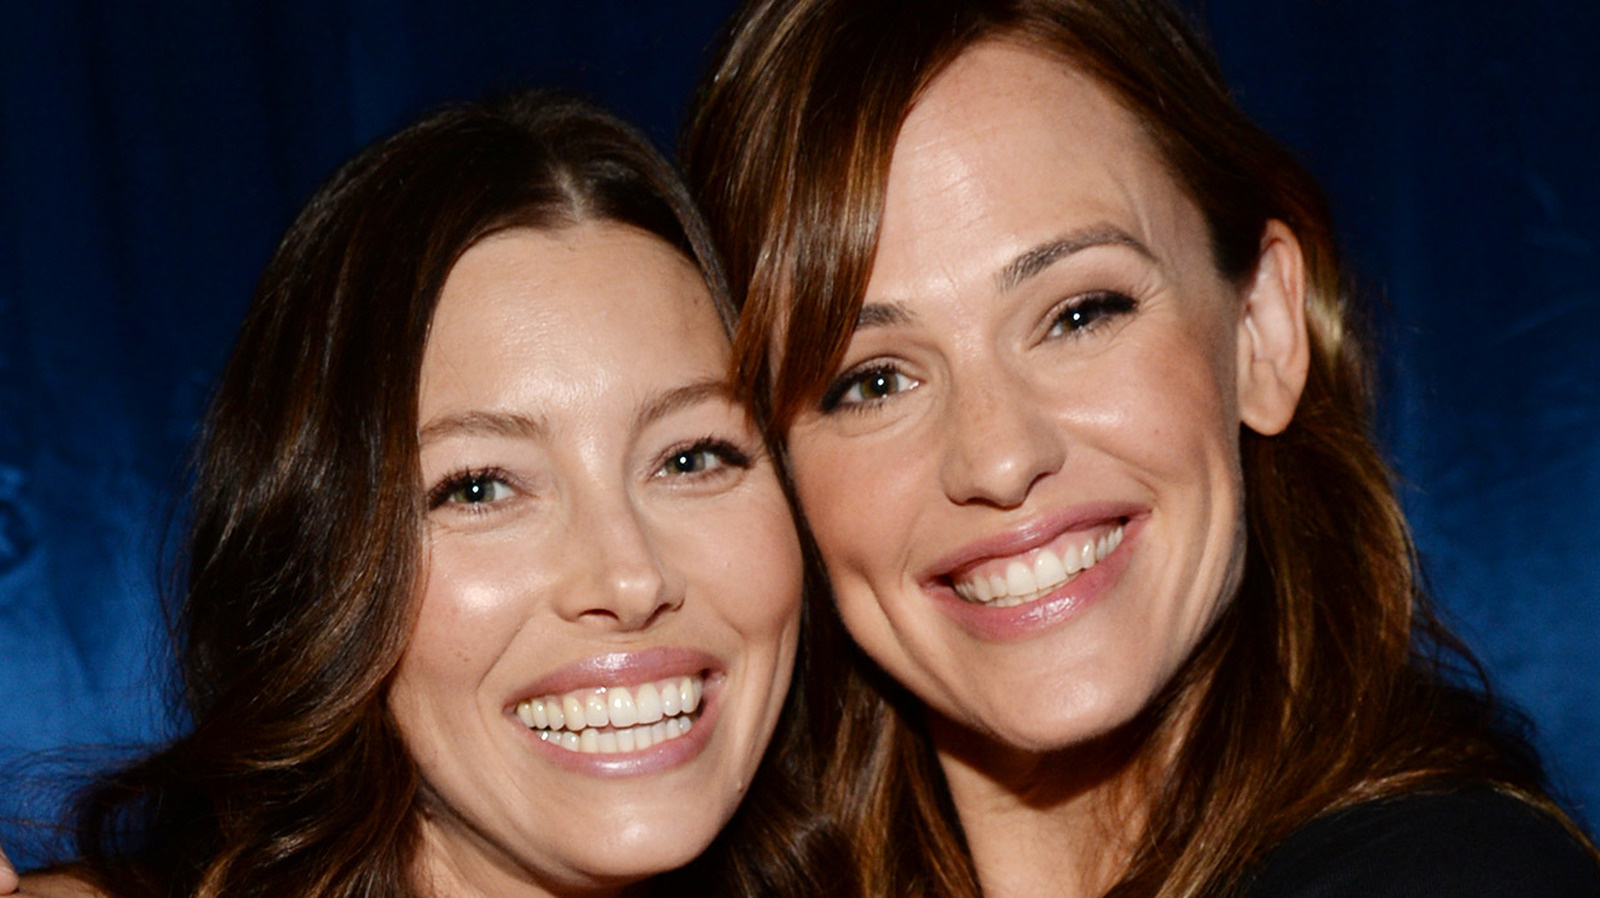 grus kutter harpun What You Didn't Know About Jennifer Garner And Jessica Biel's Relationship